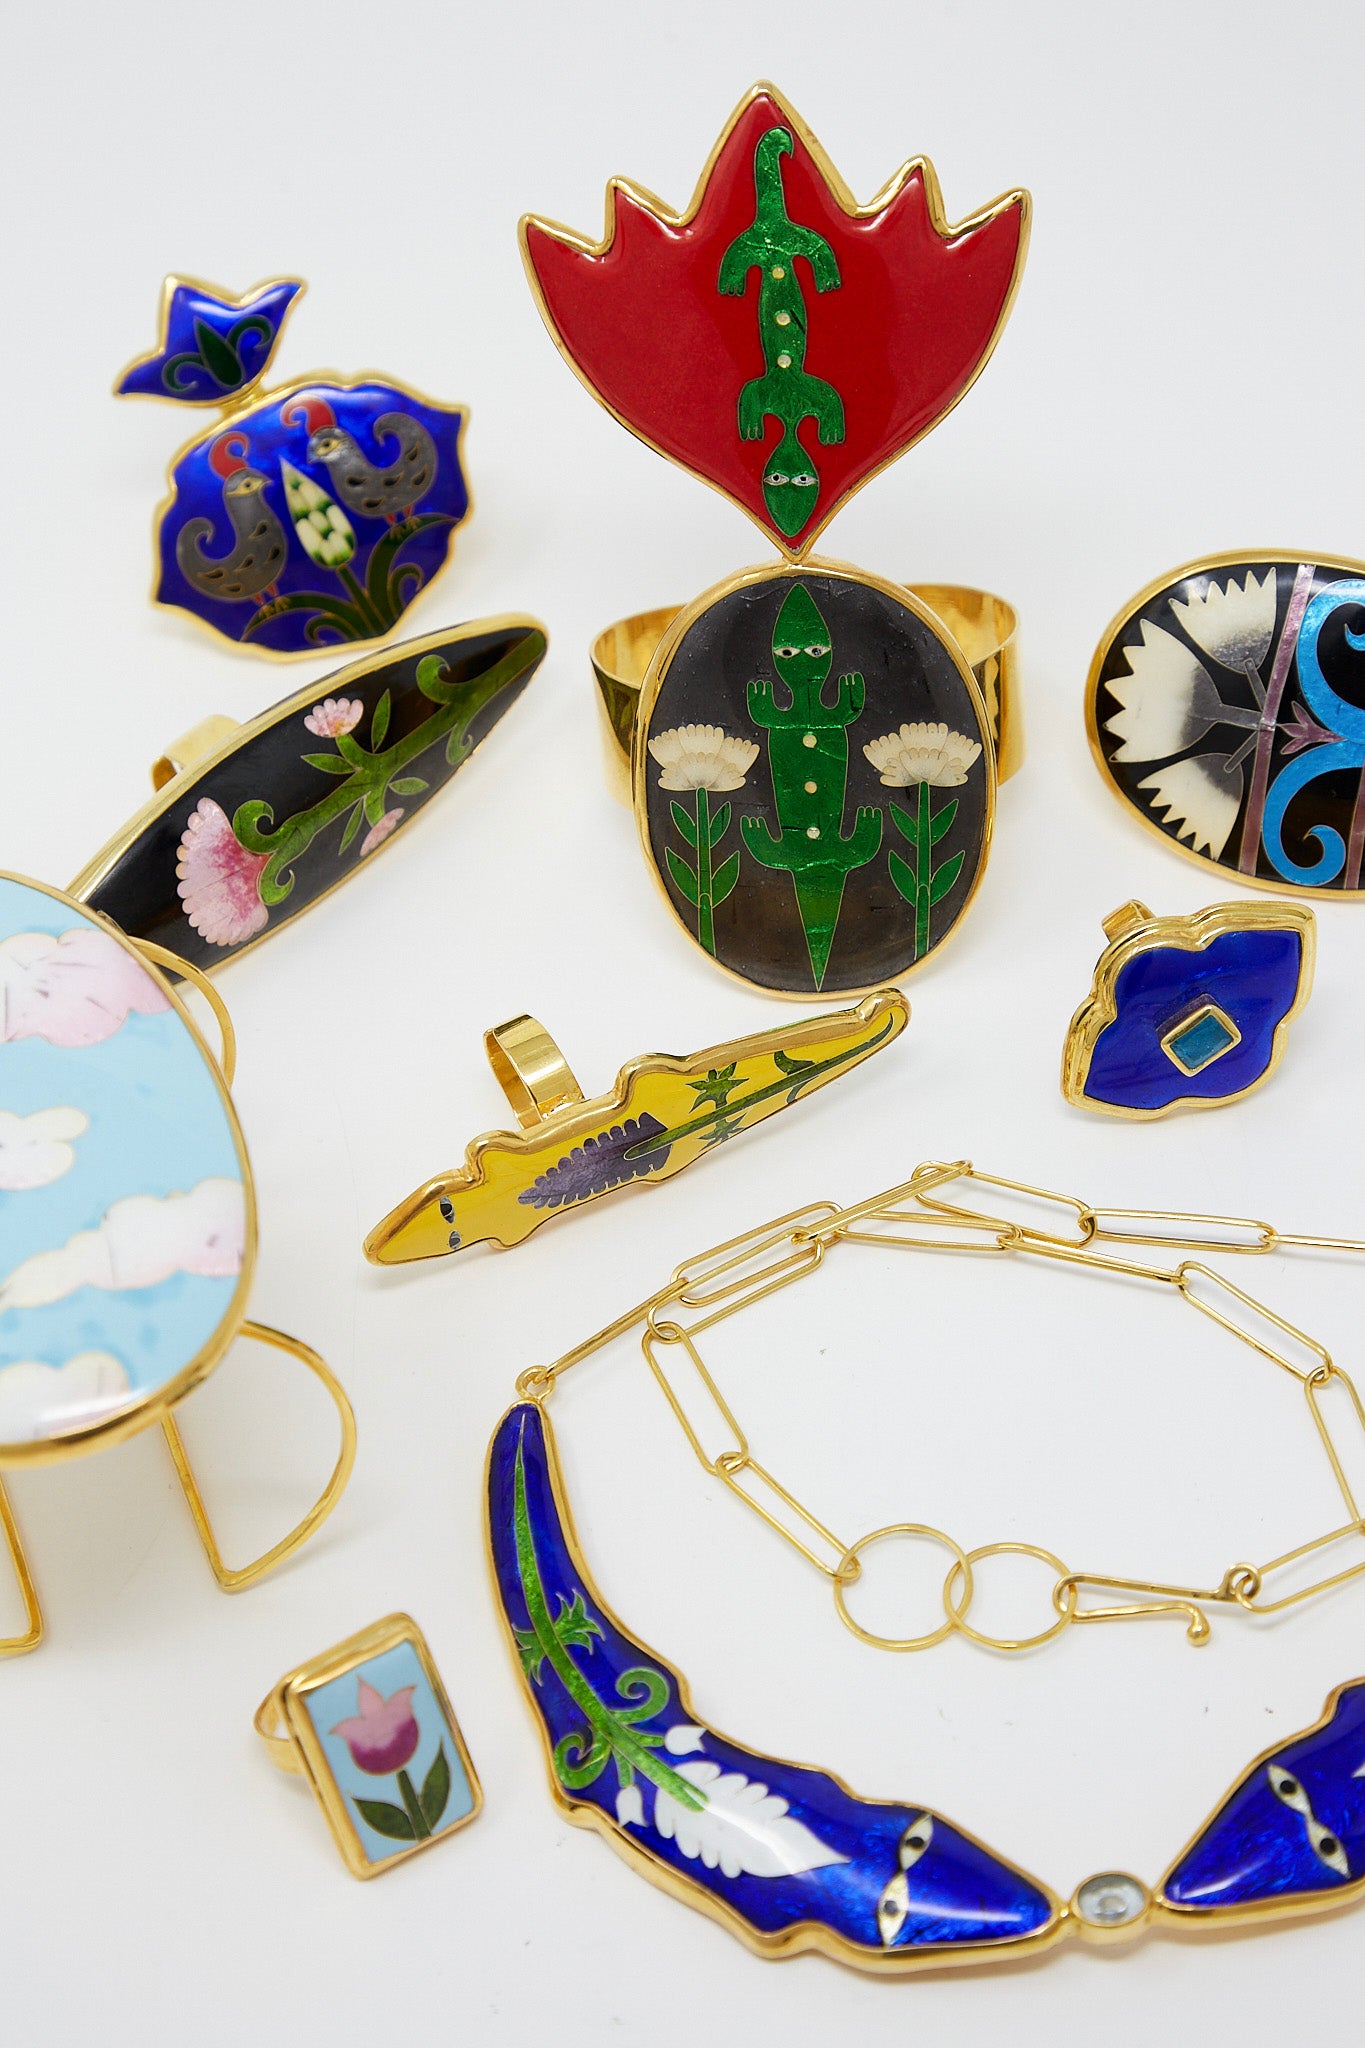 A collection of Sofio Gongli cloisonné technique gold jewelry with intricate enamel designs, including the Ring in Blue with Light Blue Center Square.